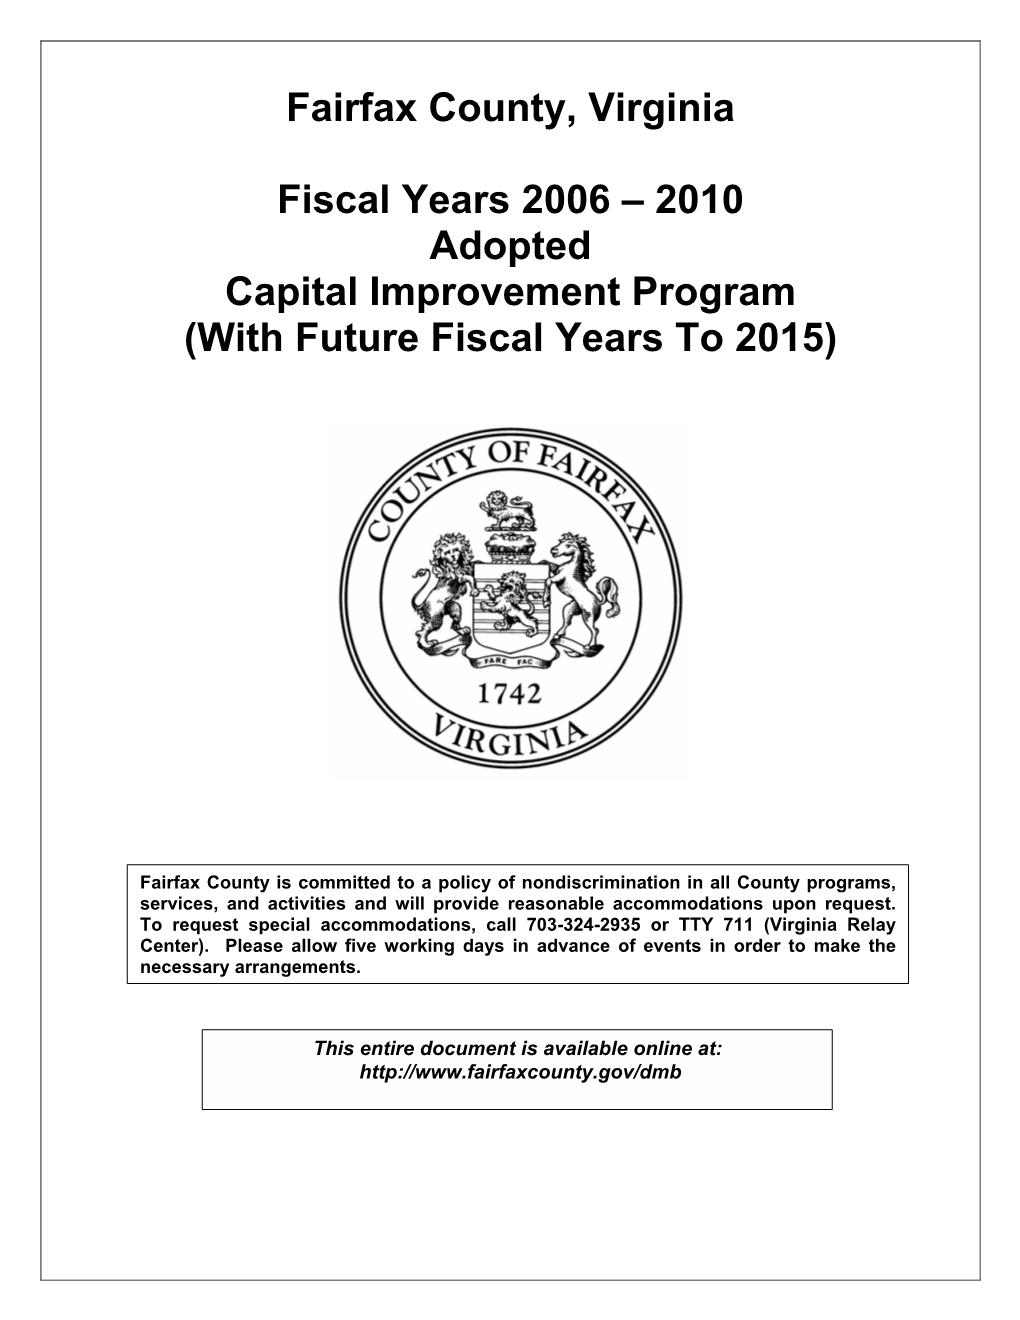 FY 2006 Advertised Budget Plan and Will Be Available on Compact Disc (CD)